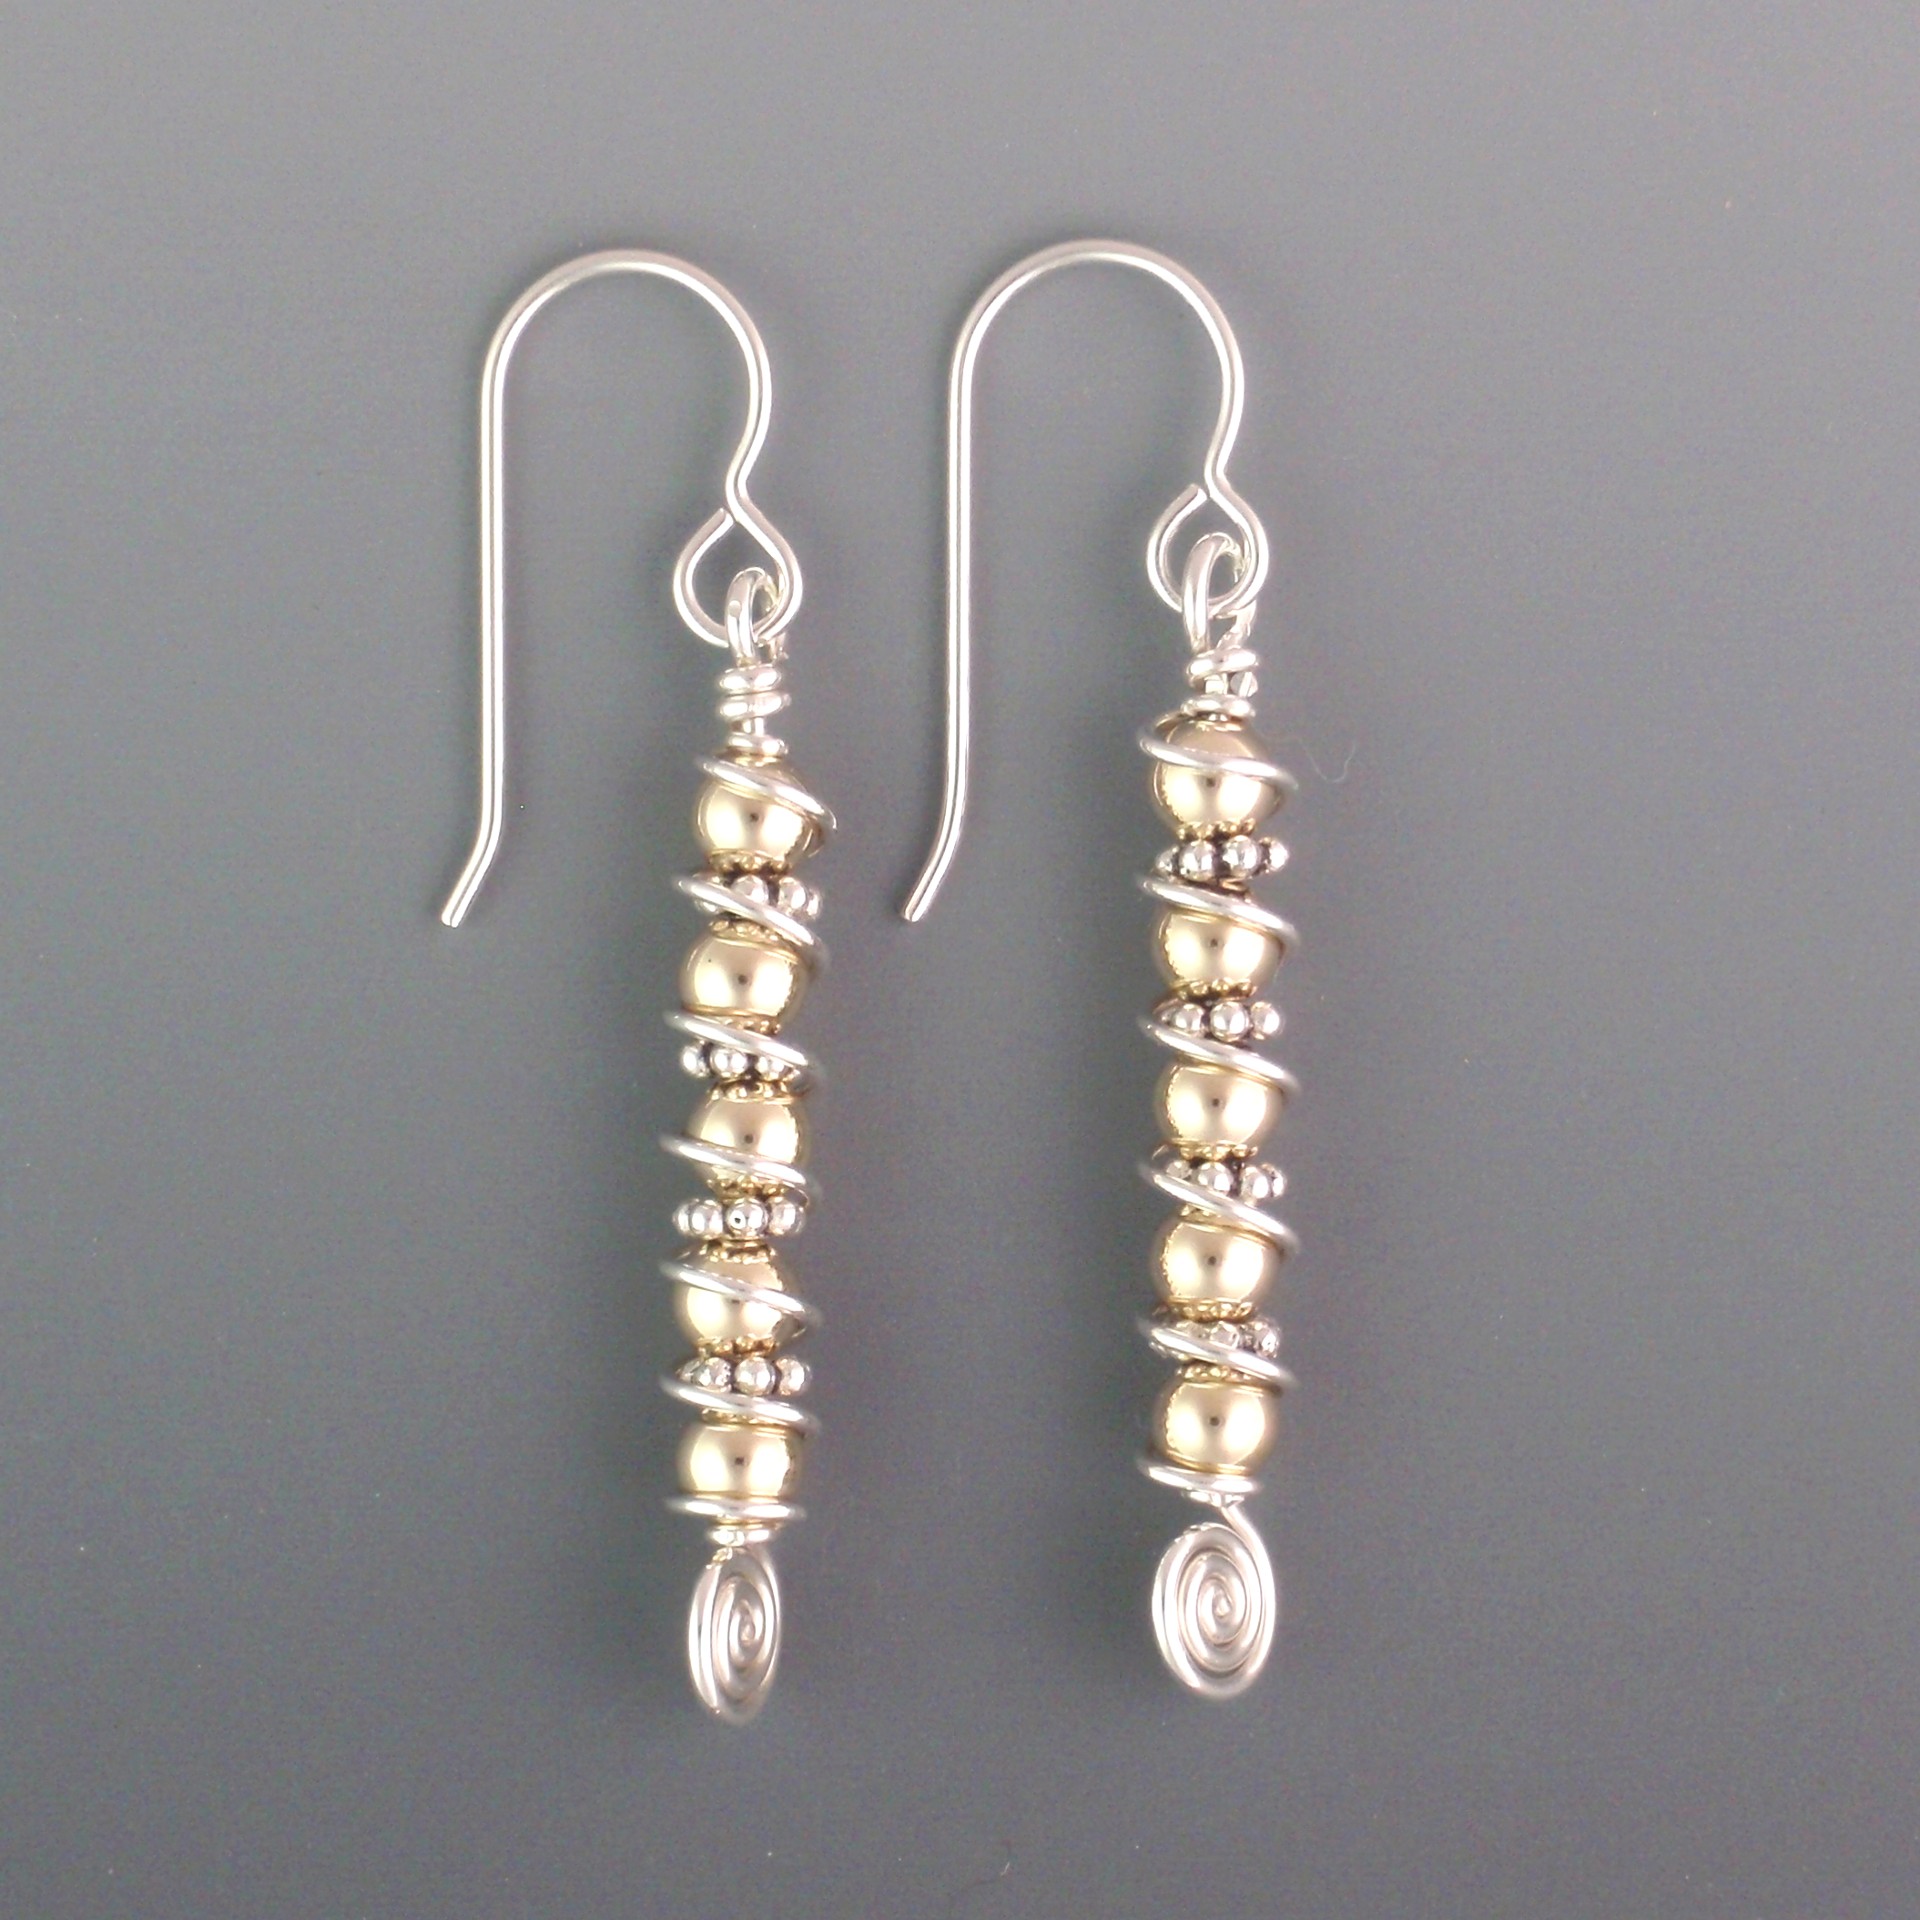 Silver and Gold Earrings - Unique Gold & Silver Earrings by BJChristian ...